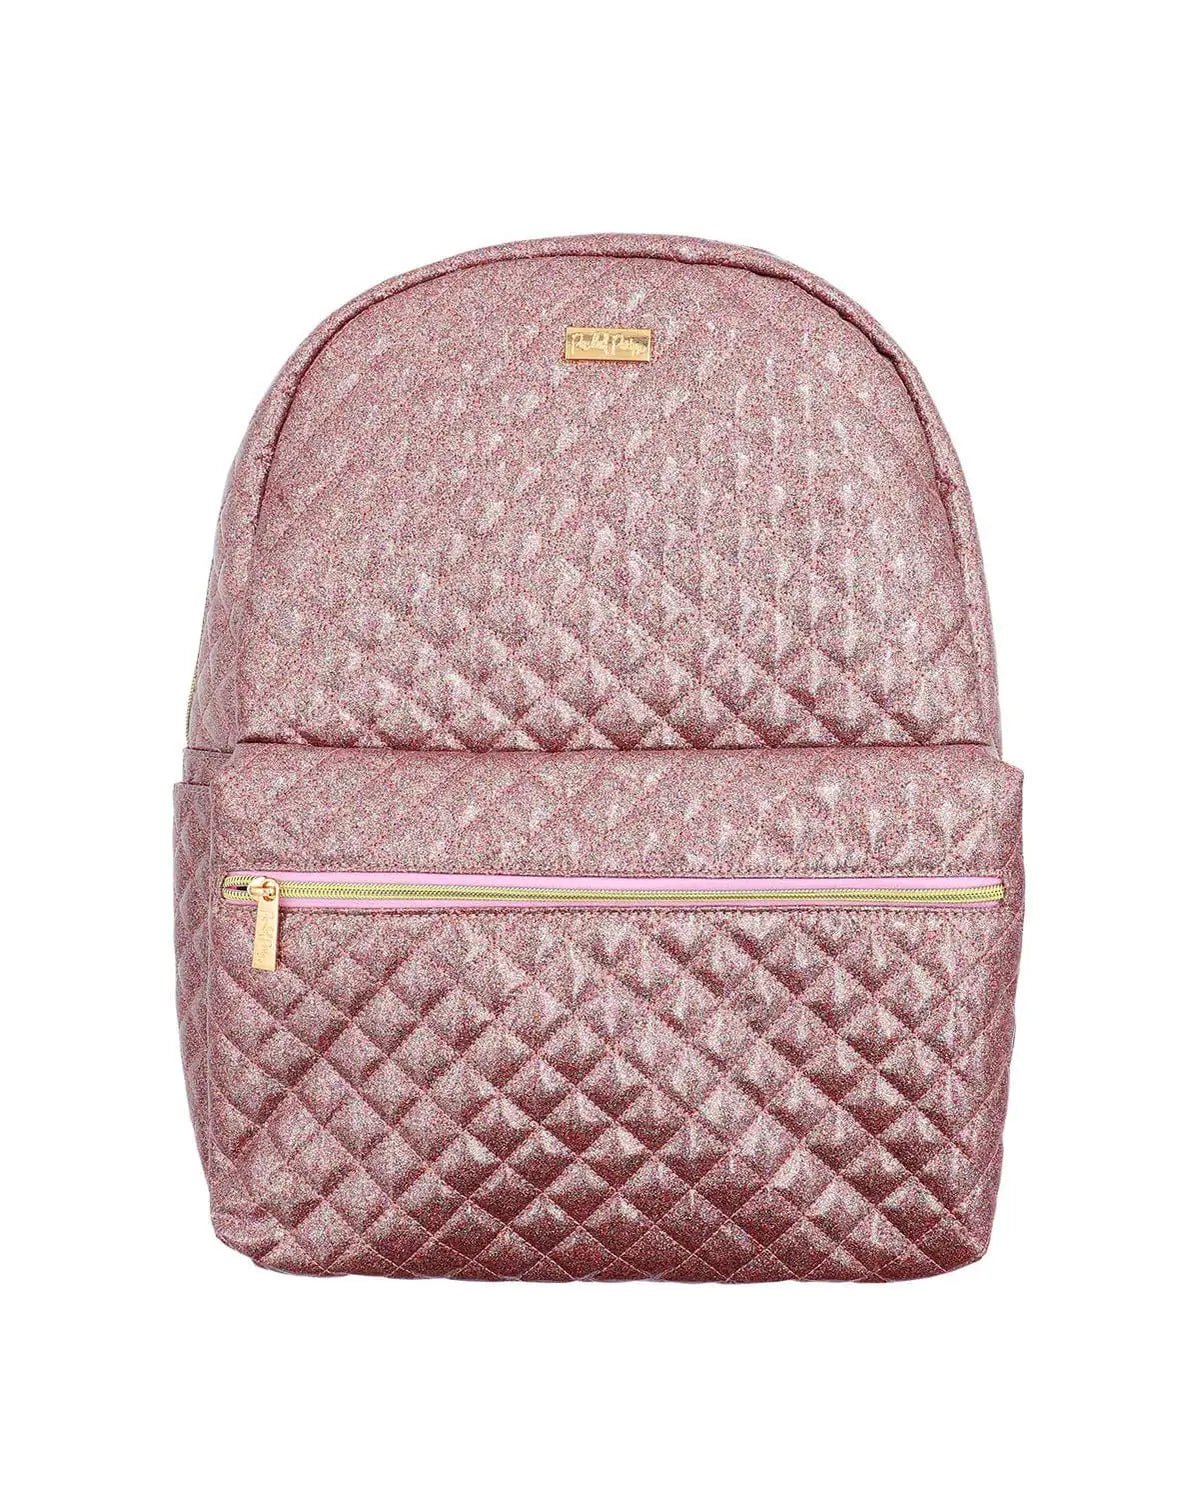 Shop Packed Party Glitter Party Backpack - Premium Backpack from Packed Party Online now at Spoiled Brat 